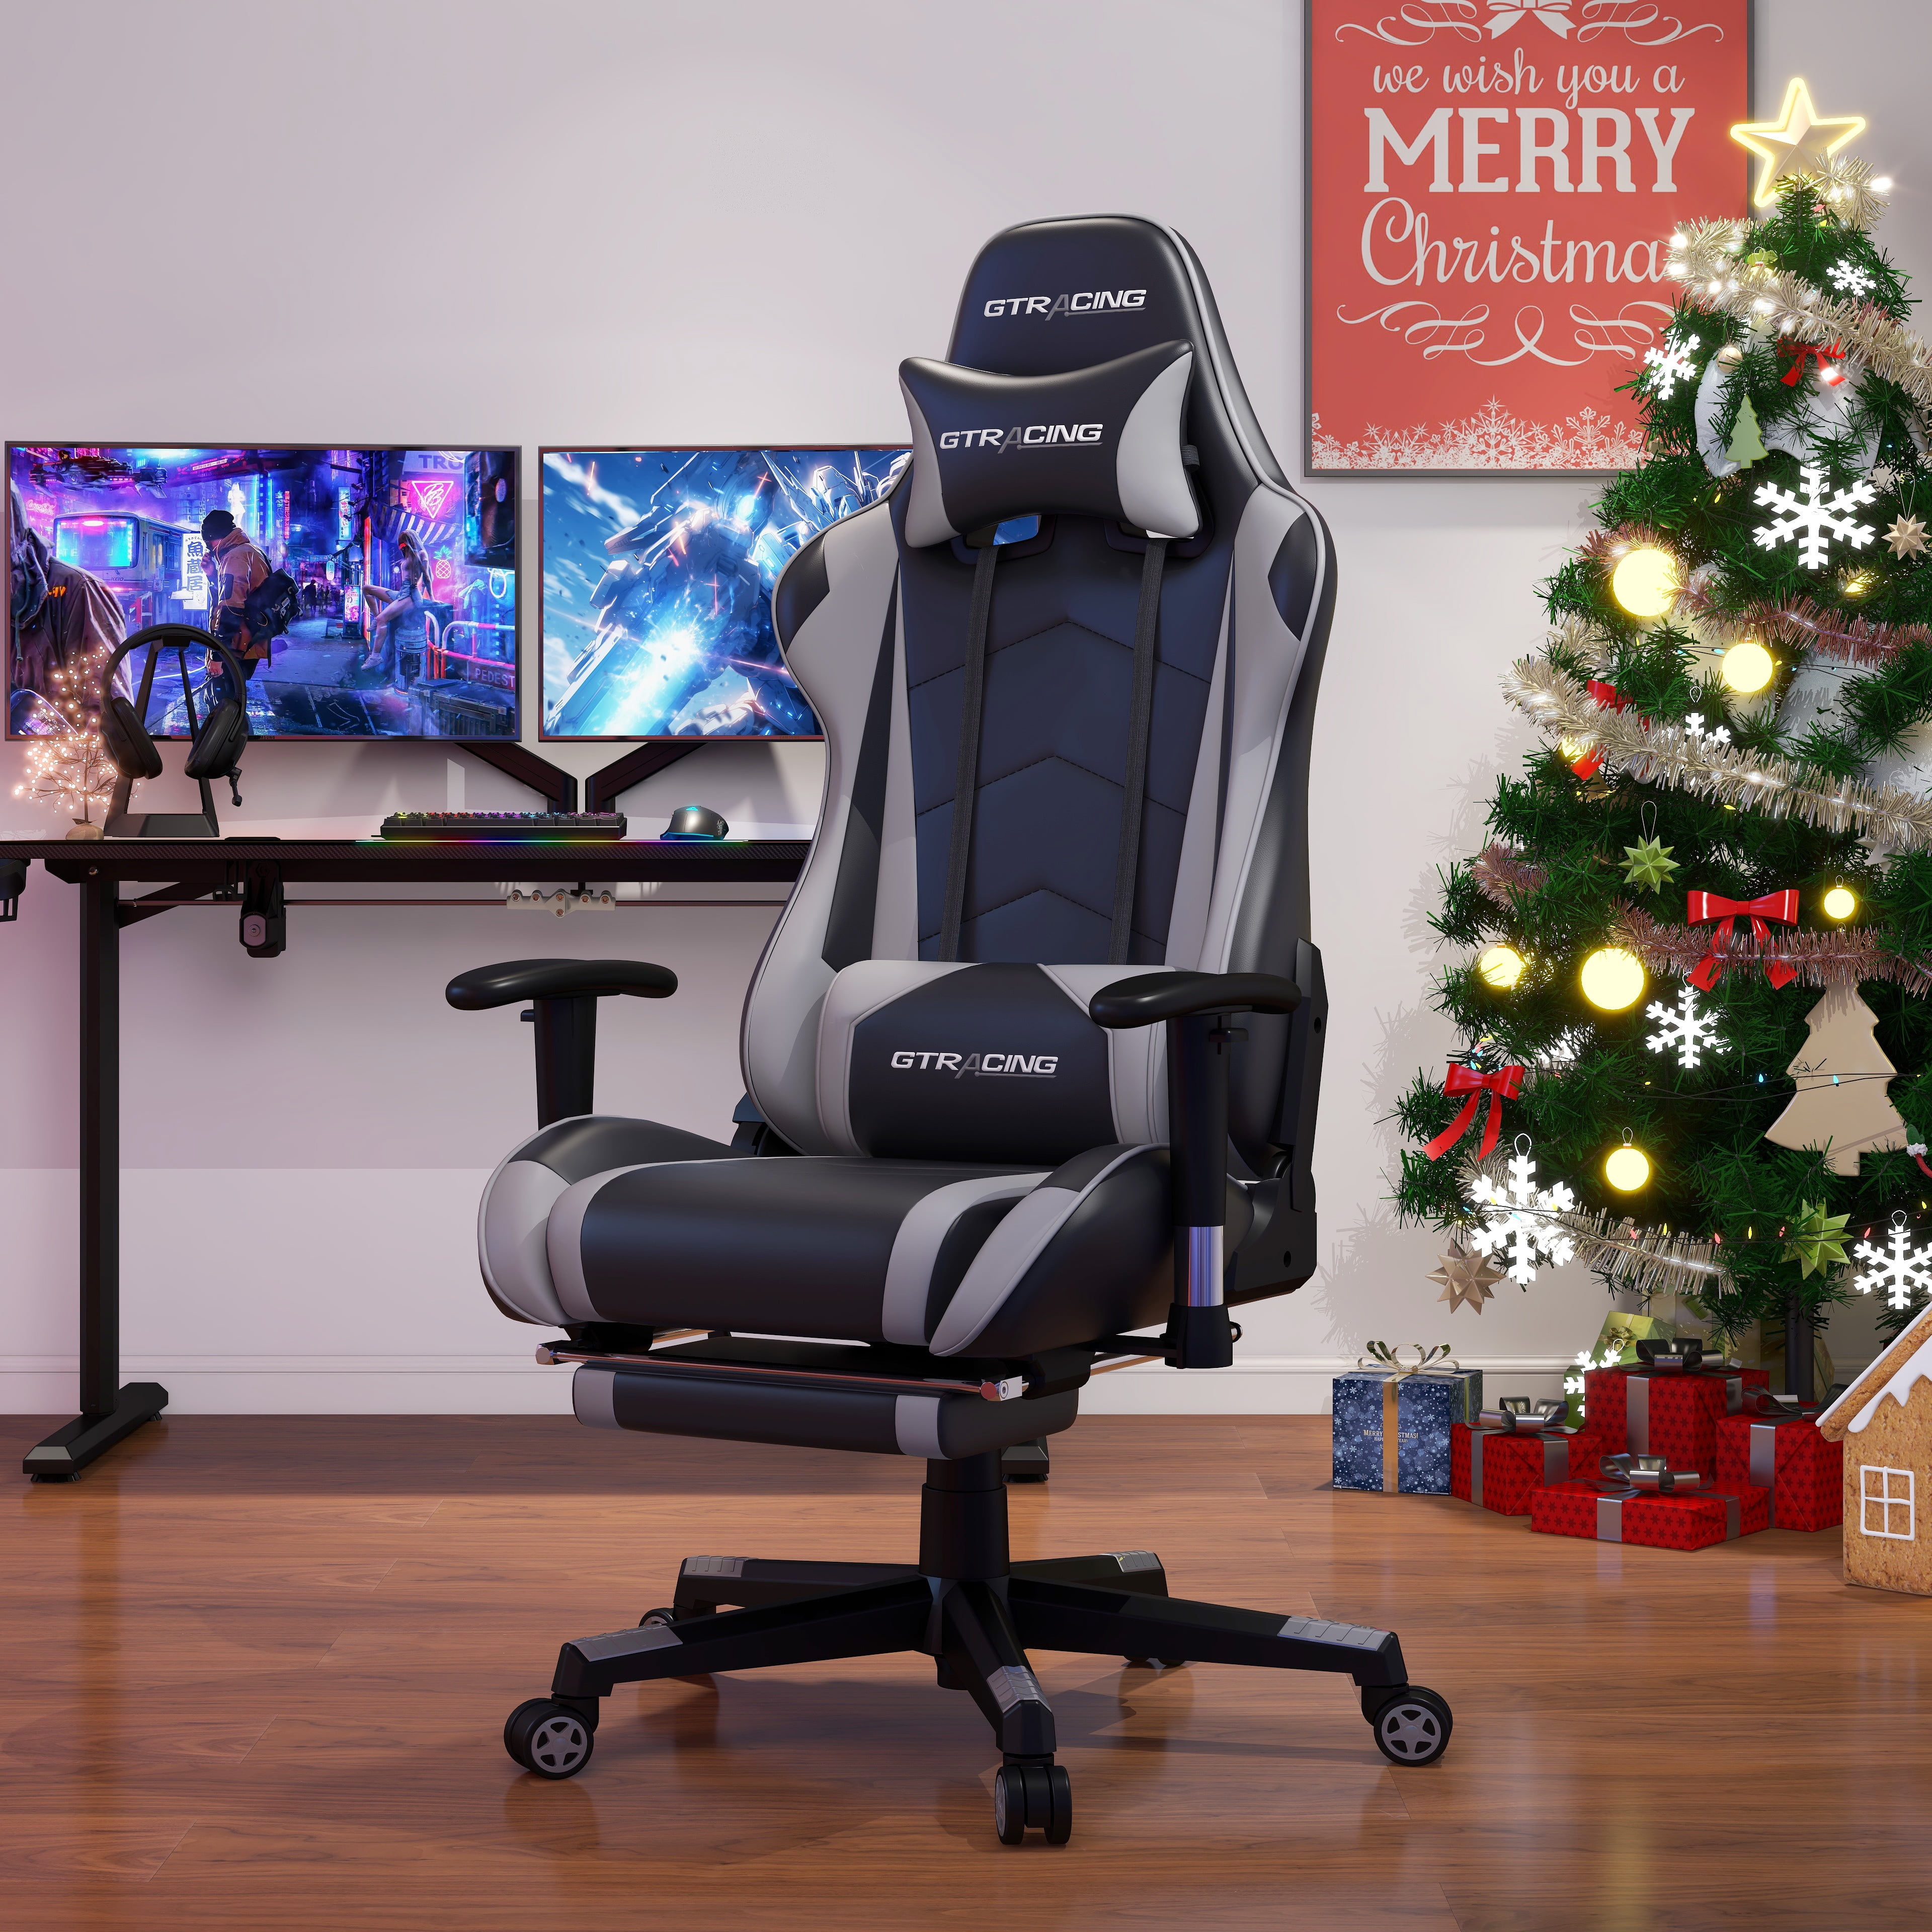 Gaming chair helps you maintain good posture - Japan Today